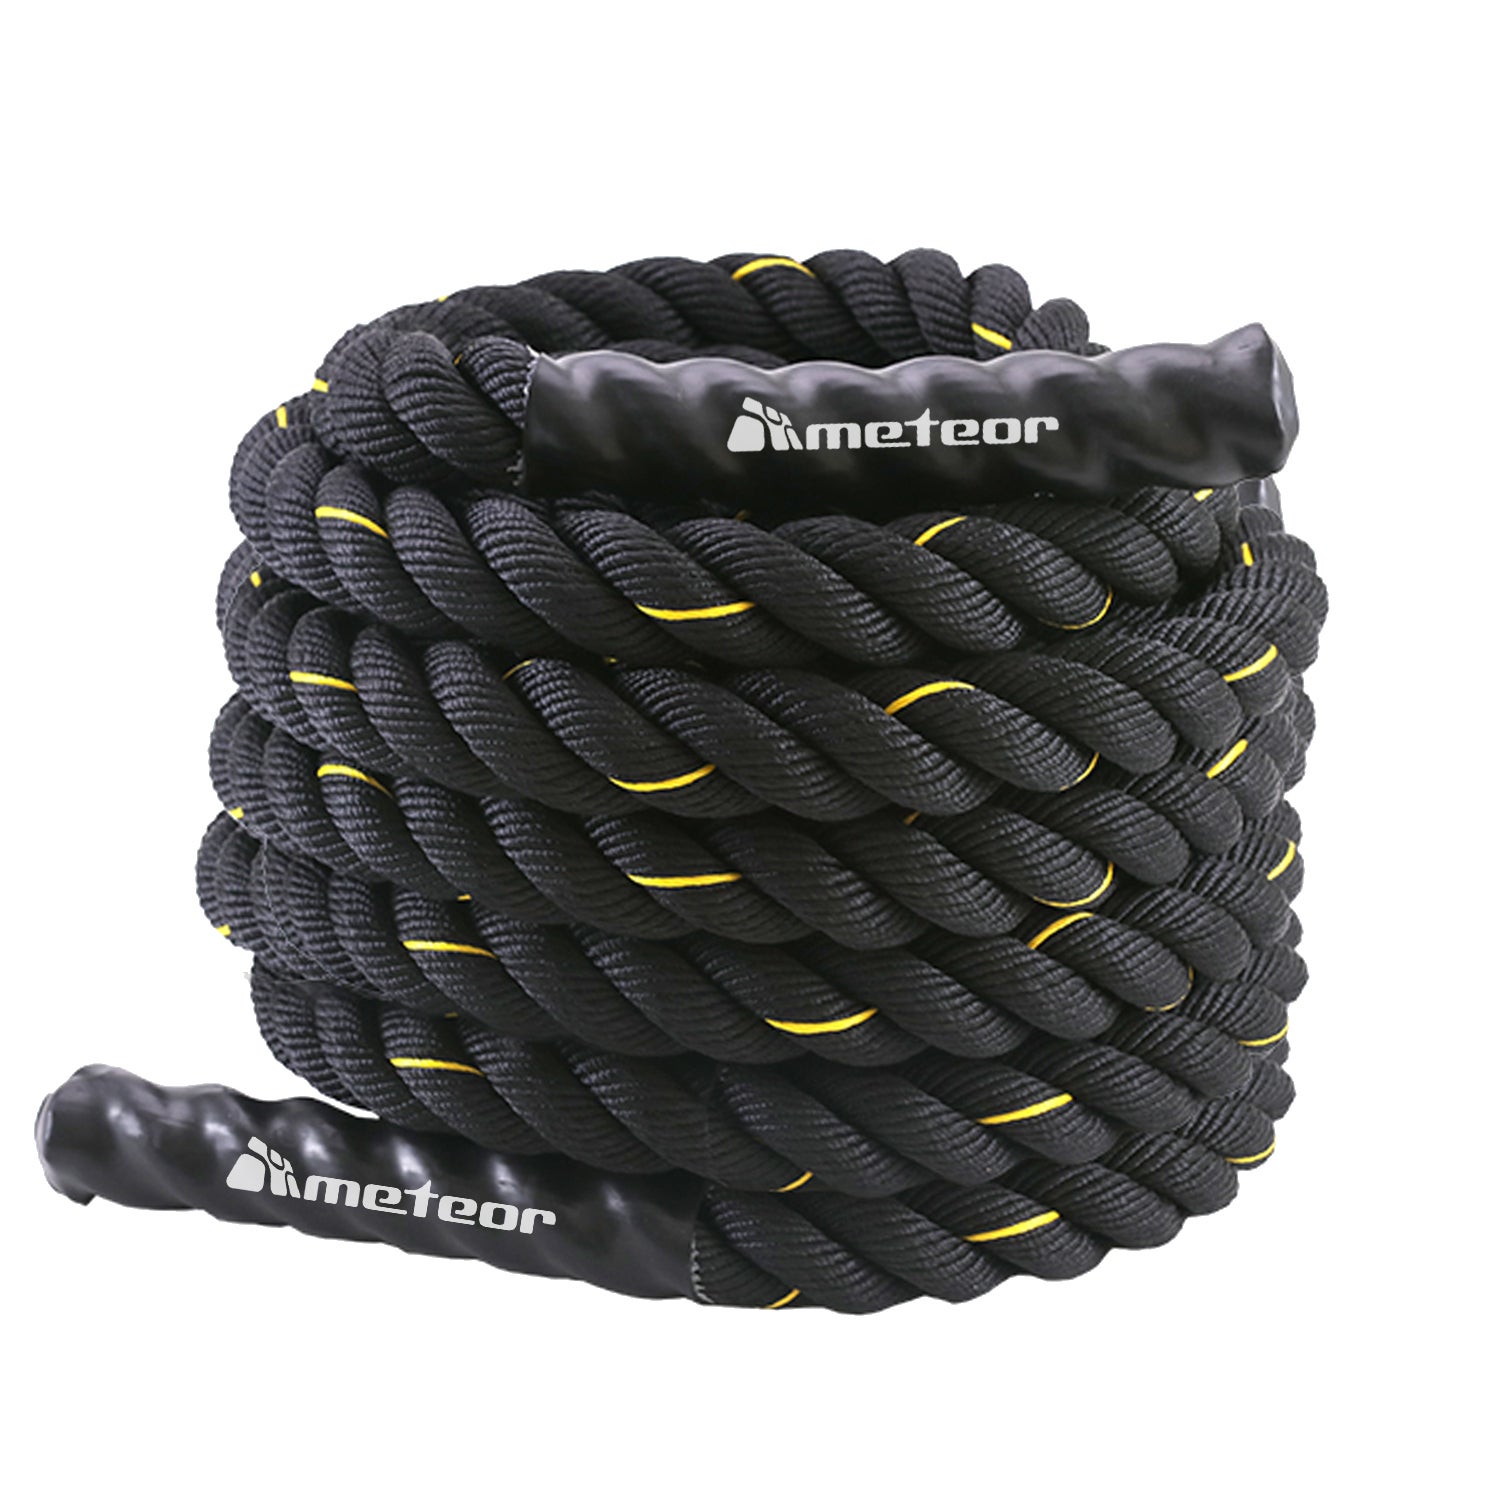 METEOR Essential Battle Rope for exercise - battling ropes,gym rope,gym ropes,training rope,exercise rope in 38mm Thickness - battle rope anchor available